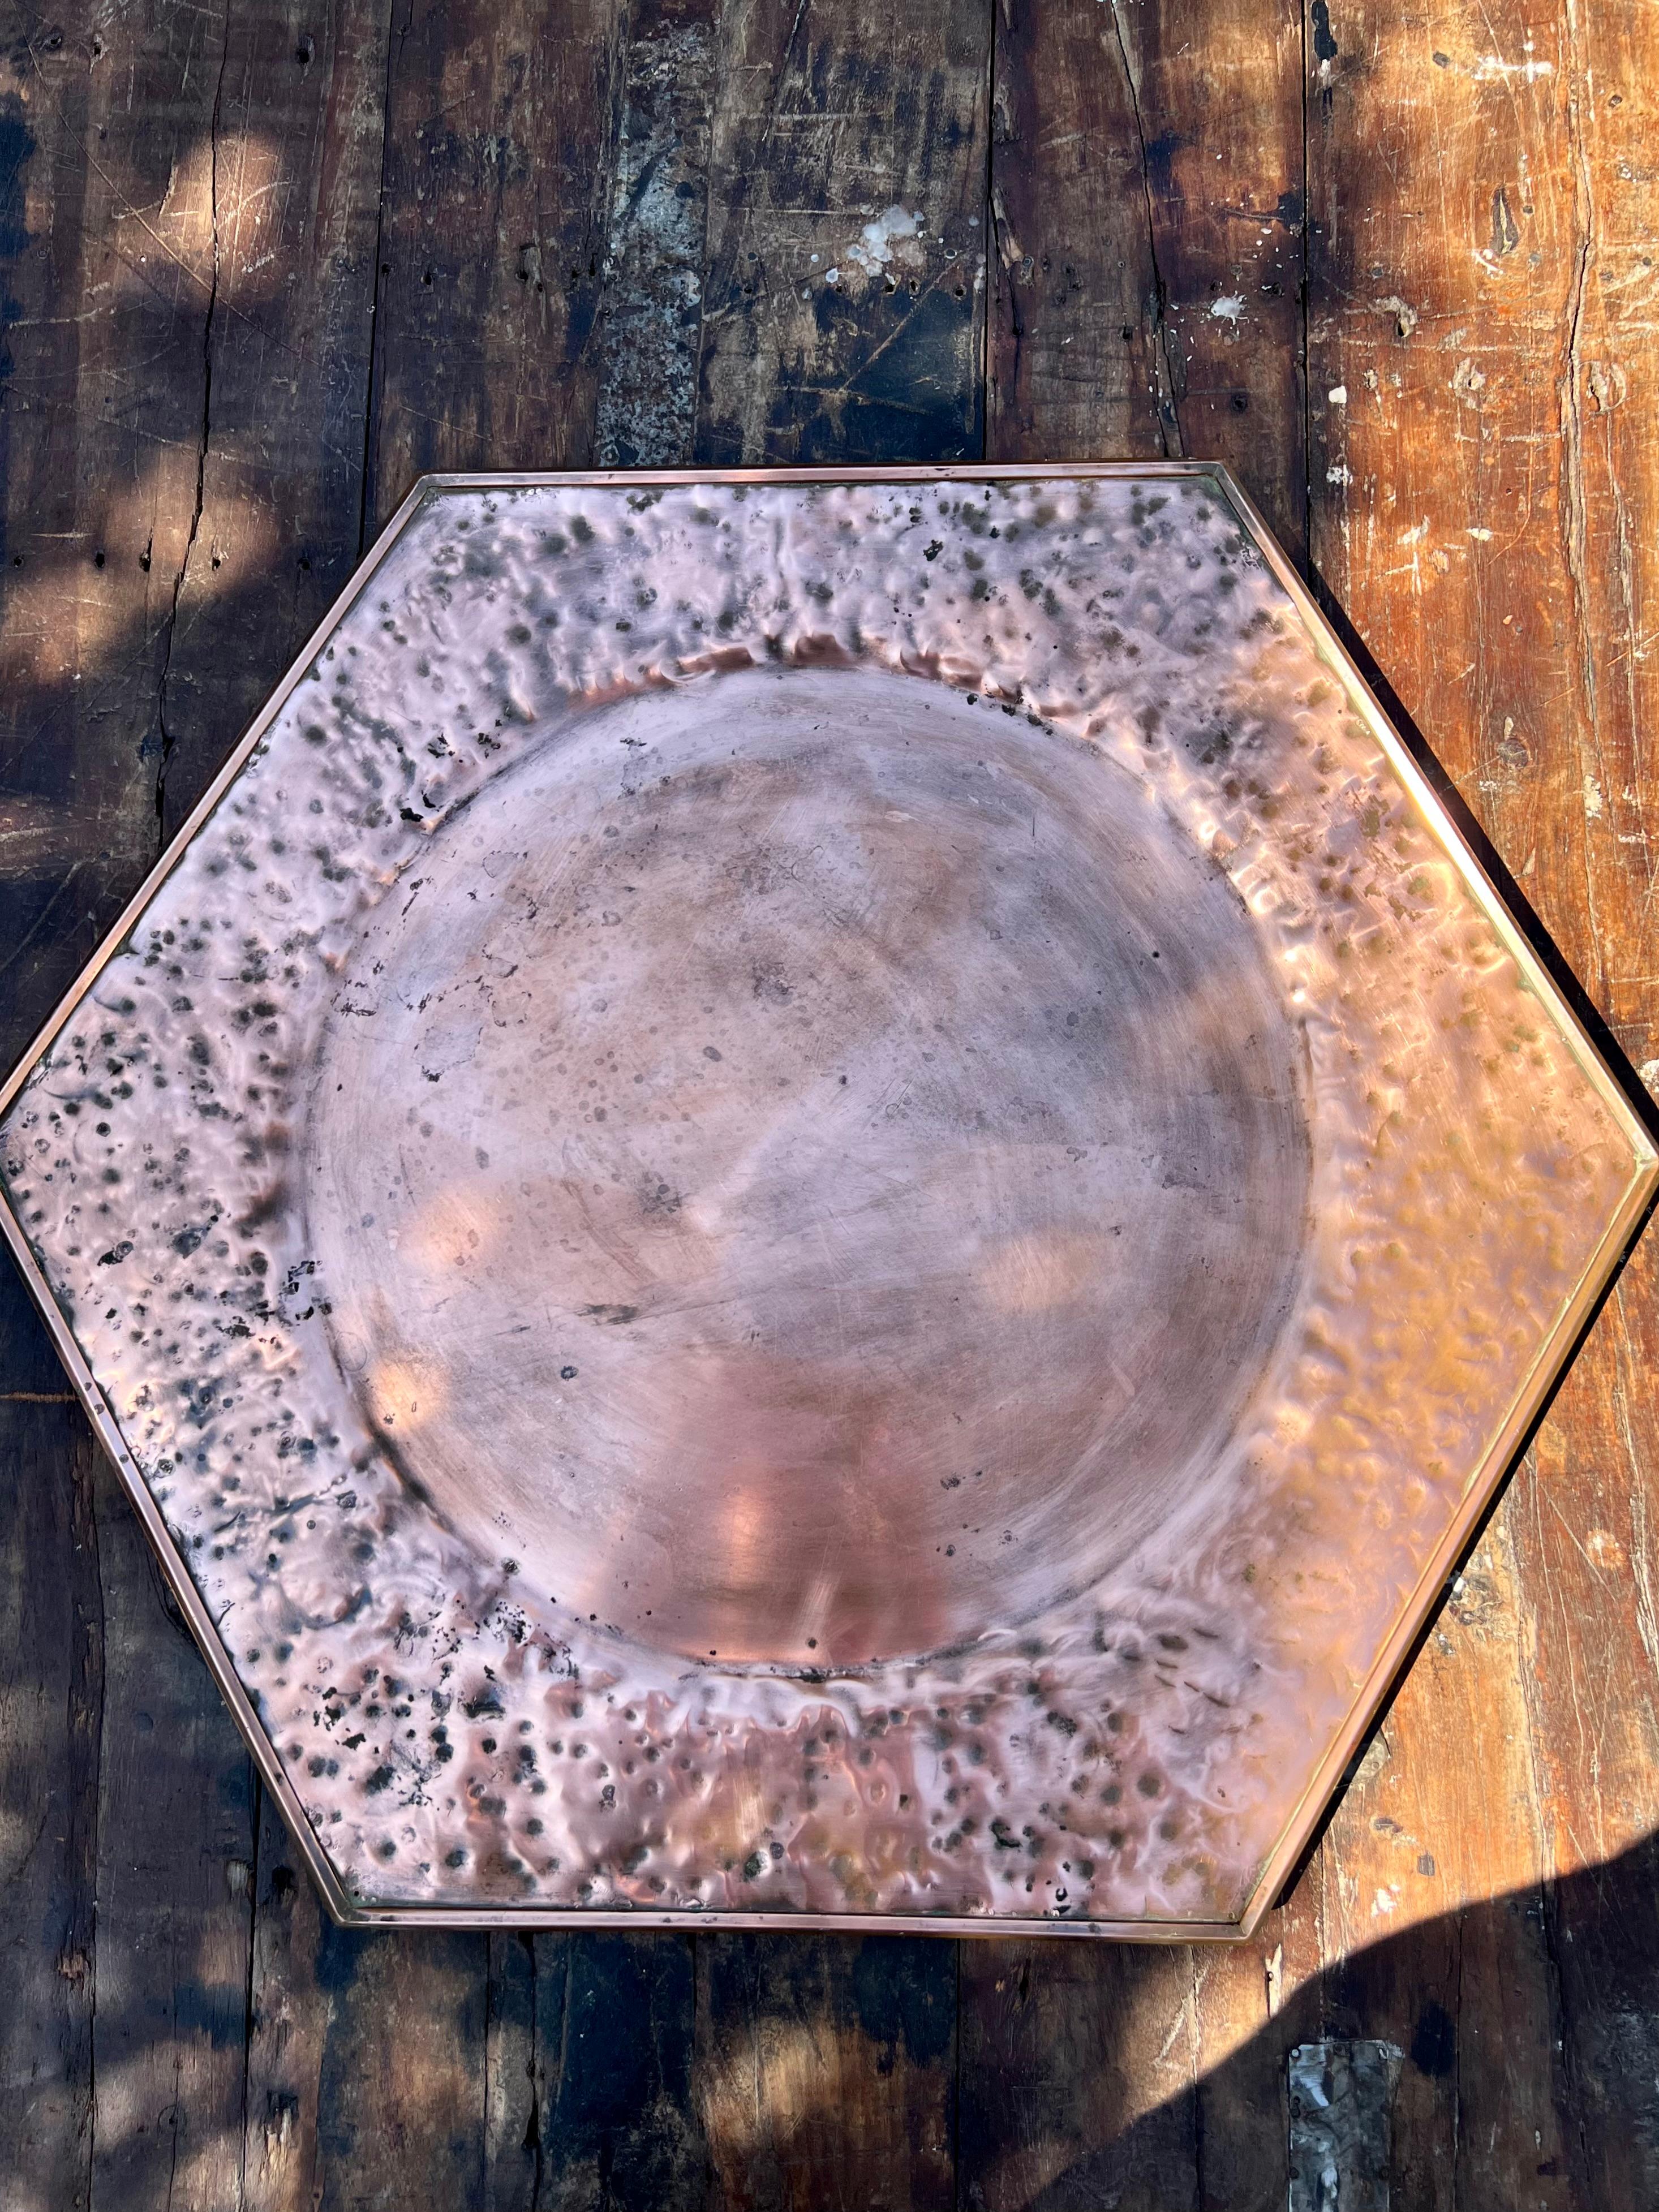 Stunning hammered copper tray in hexagon shape. 

In sacred geometry and ancient sagas the hexagon represents the potential for life. Because of its two interlocking triangles, the hexagon as a symbol often stands for harmony and balance. 

This